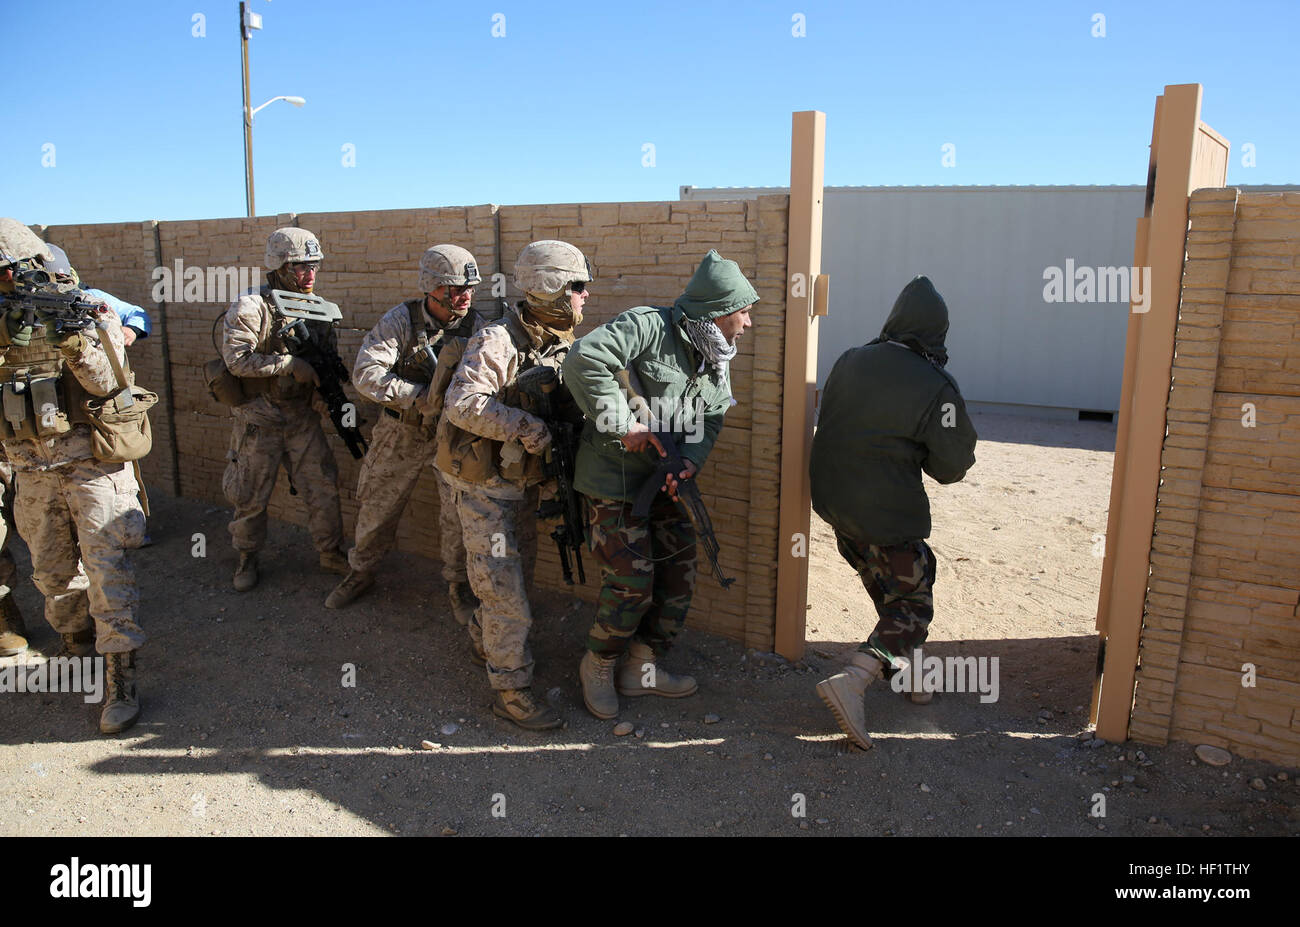 Marines with Bravo Company, 1st Battalion, 7th Marine Regiment, follow Afghan role-players into a compound during a counterinsurgency exercise on Range 220 at Marine Corps Air Ground Combat Center Twentynine Palms, Calif., Dec. 9, 2013. The $140 million urban warfare training facility consists of more than 1,000 buildings and is divided into four sectors. The buildings replicate what can be found in an urban town to include gas stations, factories, one story complexes, marketplaces and multiple story buildings. Infantrymen work hand in hand with Afghans during counterinsurgency exercise 131209 Stock Photo